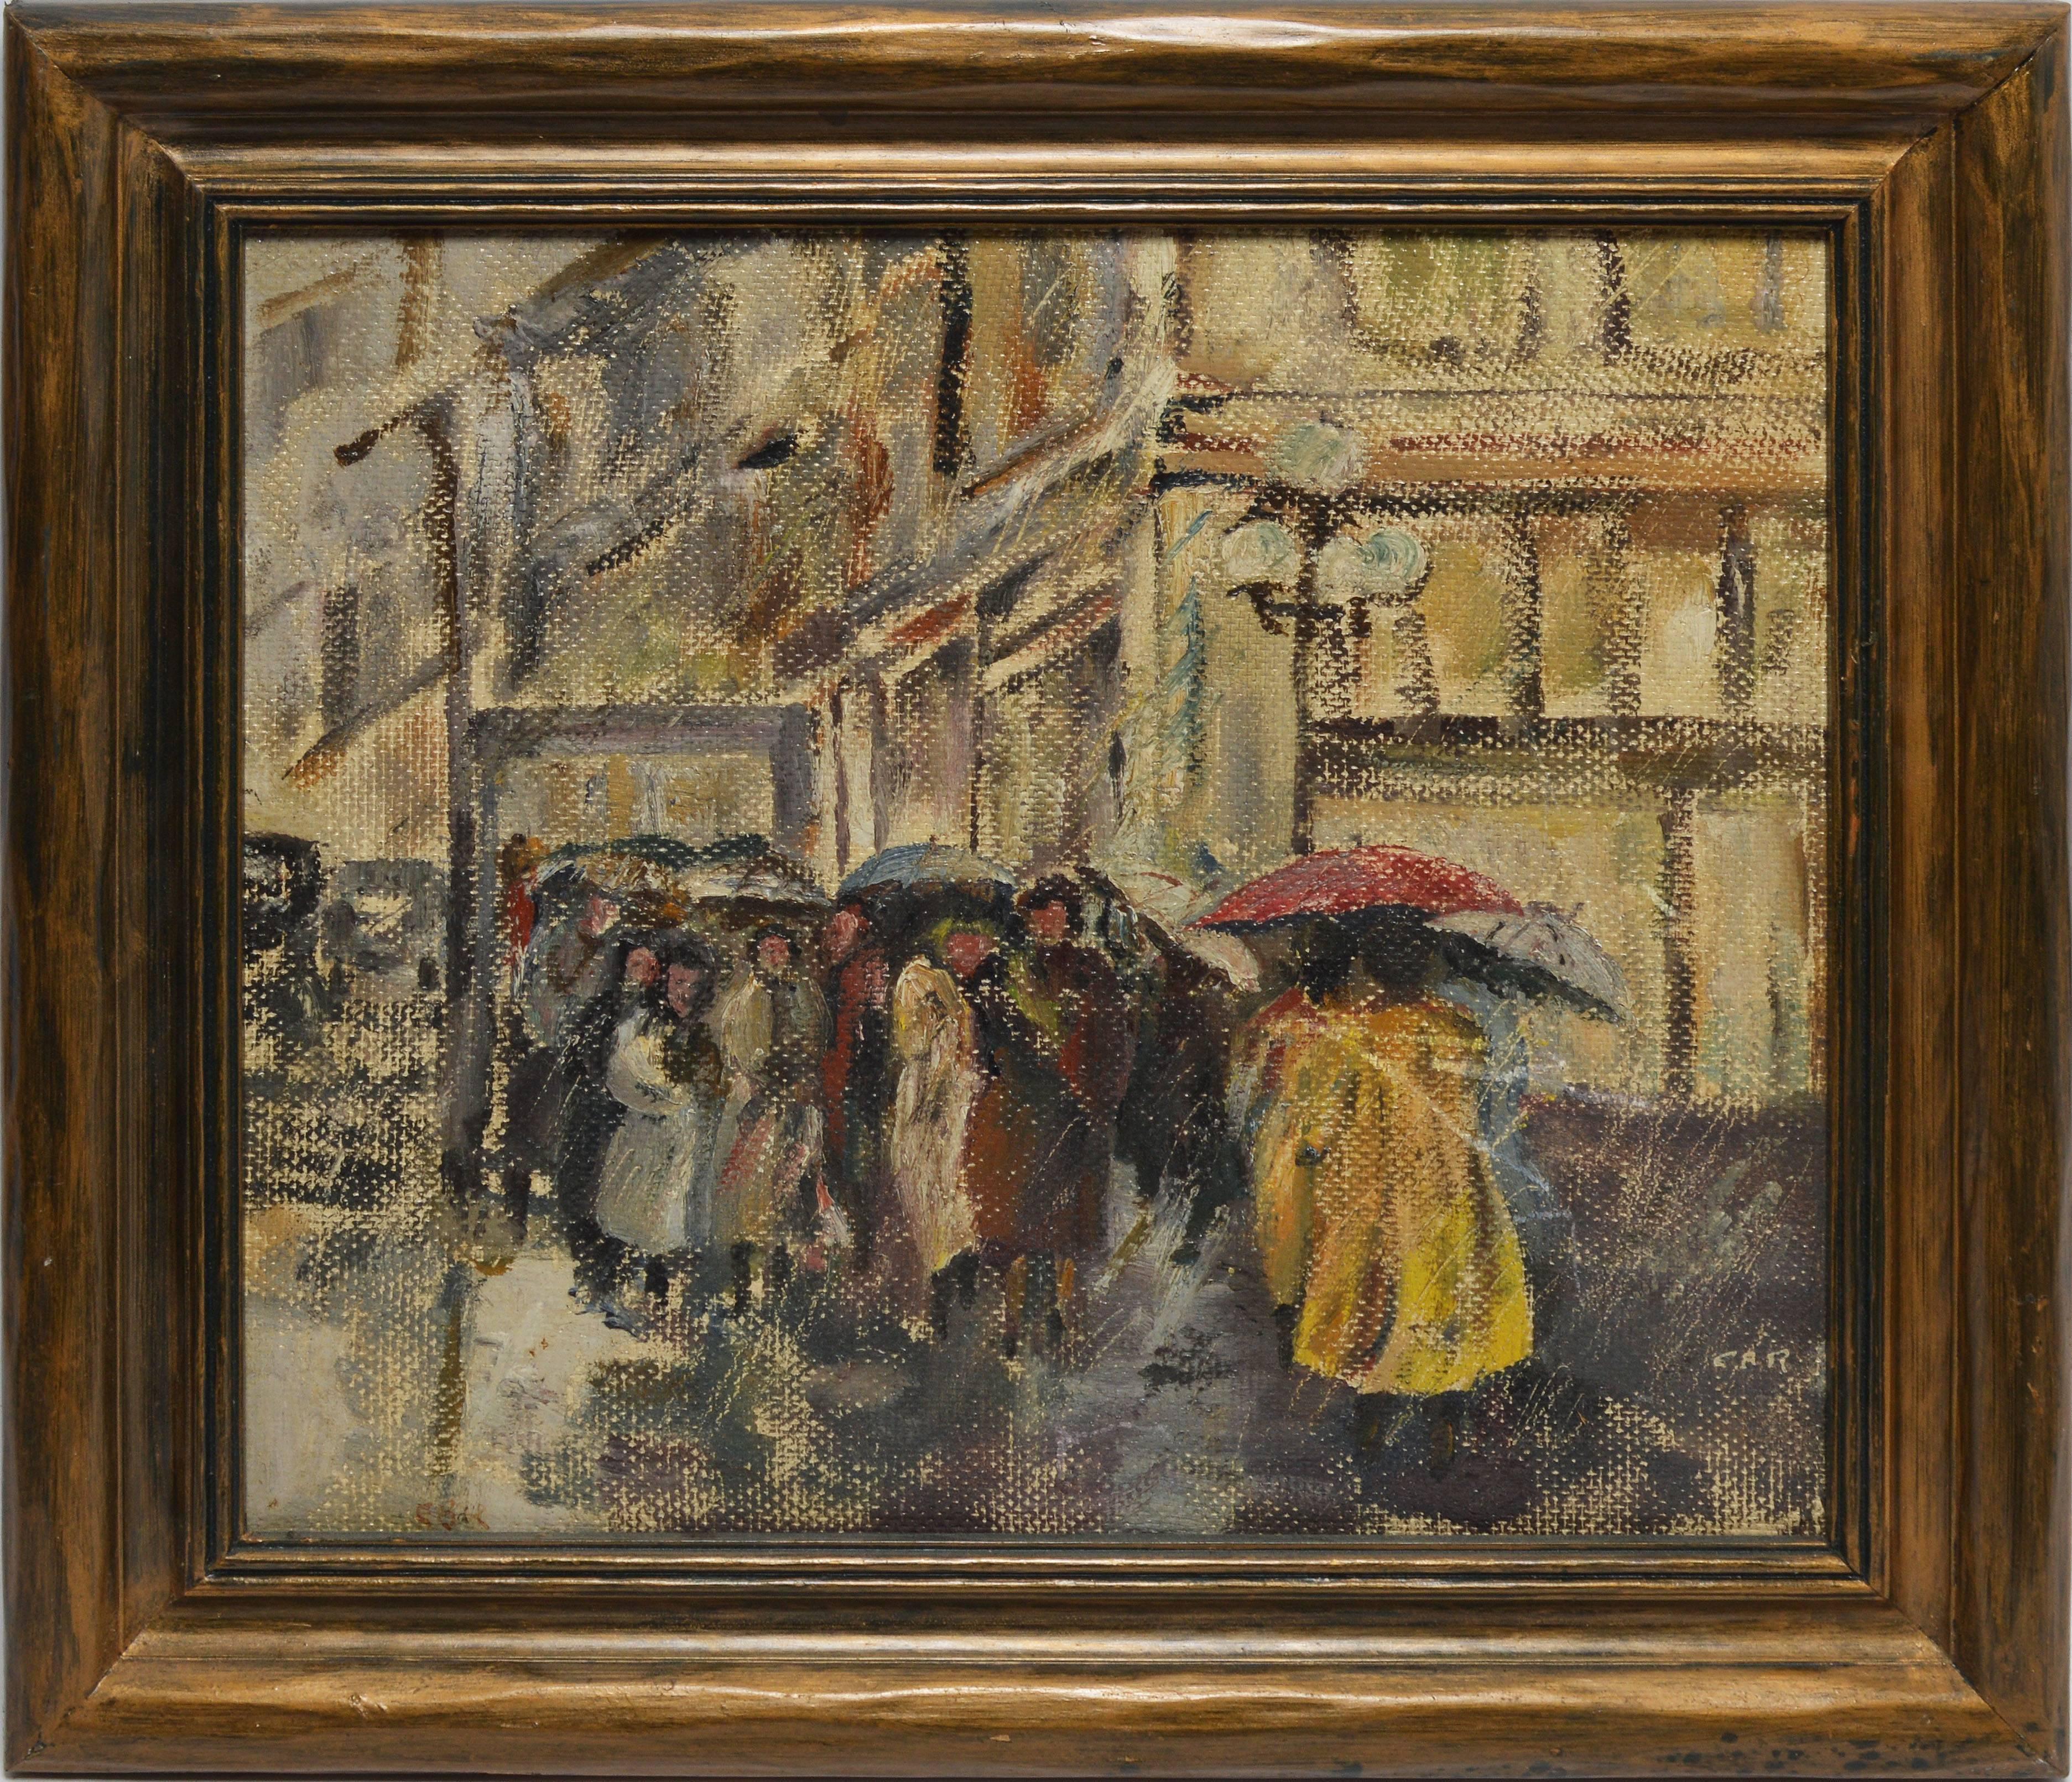 Unknown Landscape Painting - Modernist View of a Rainy Street